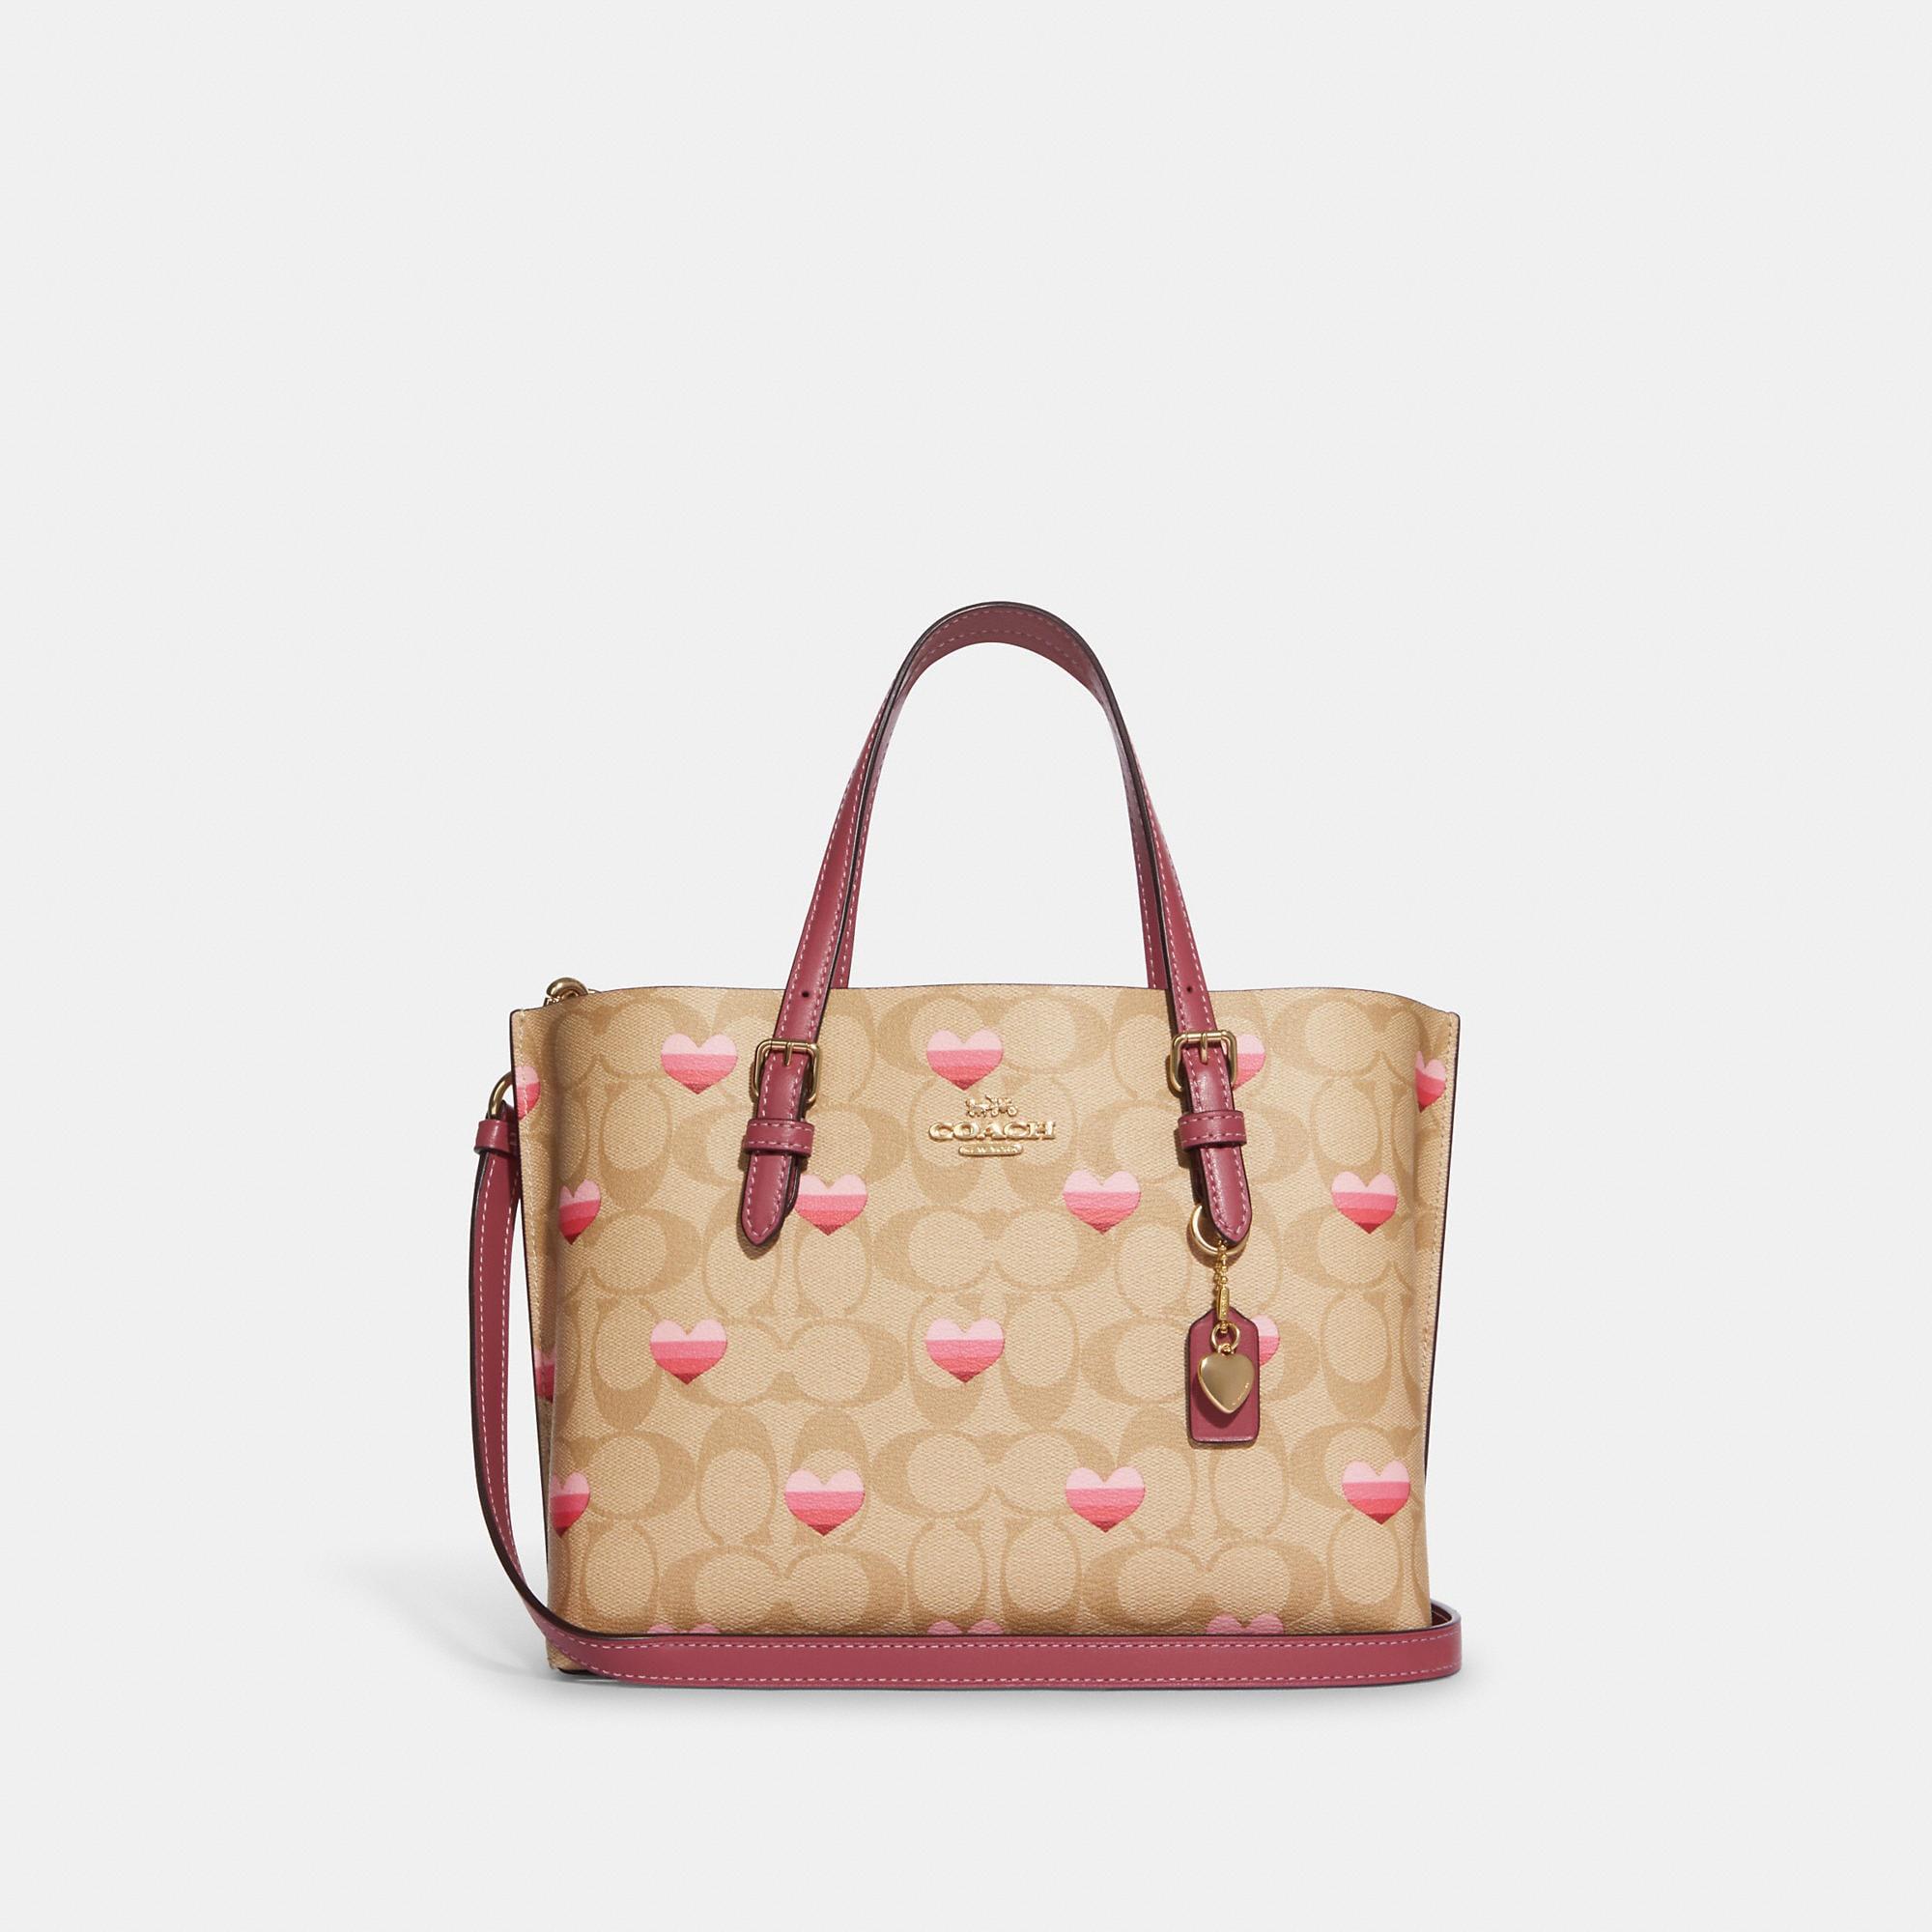 Mollie Tote 25 In Signature Canvas - www.inf-inet.com